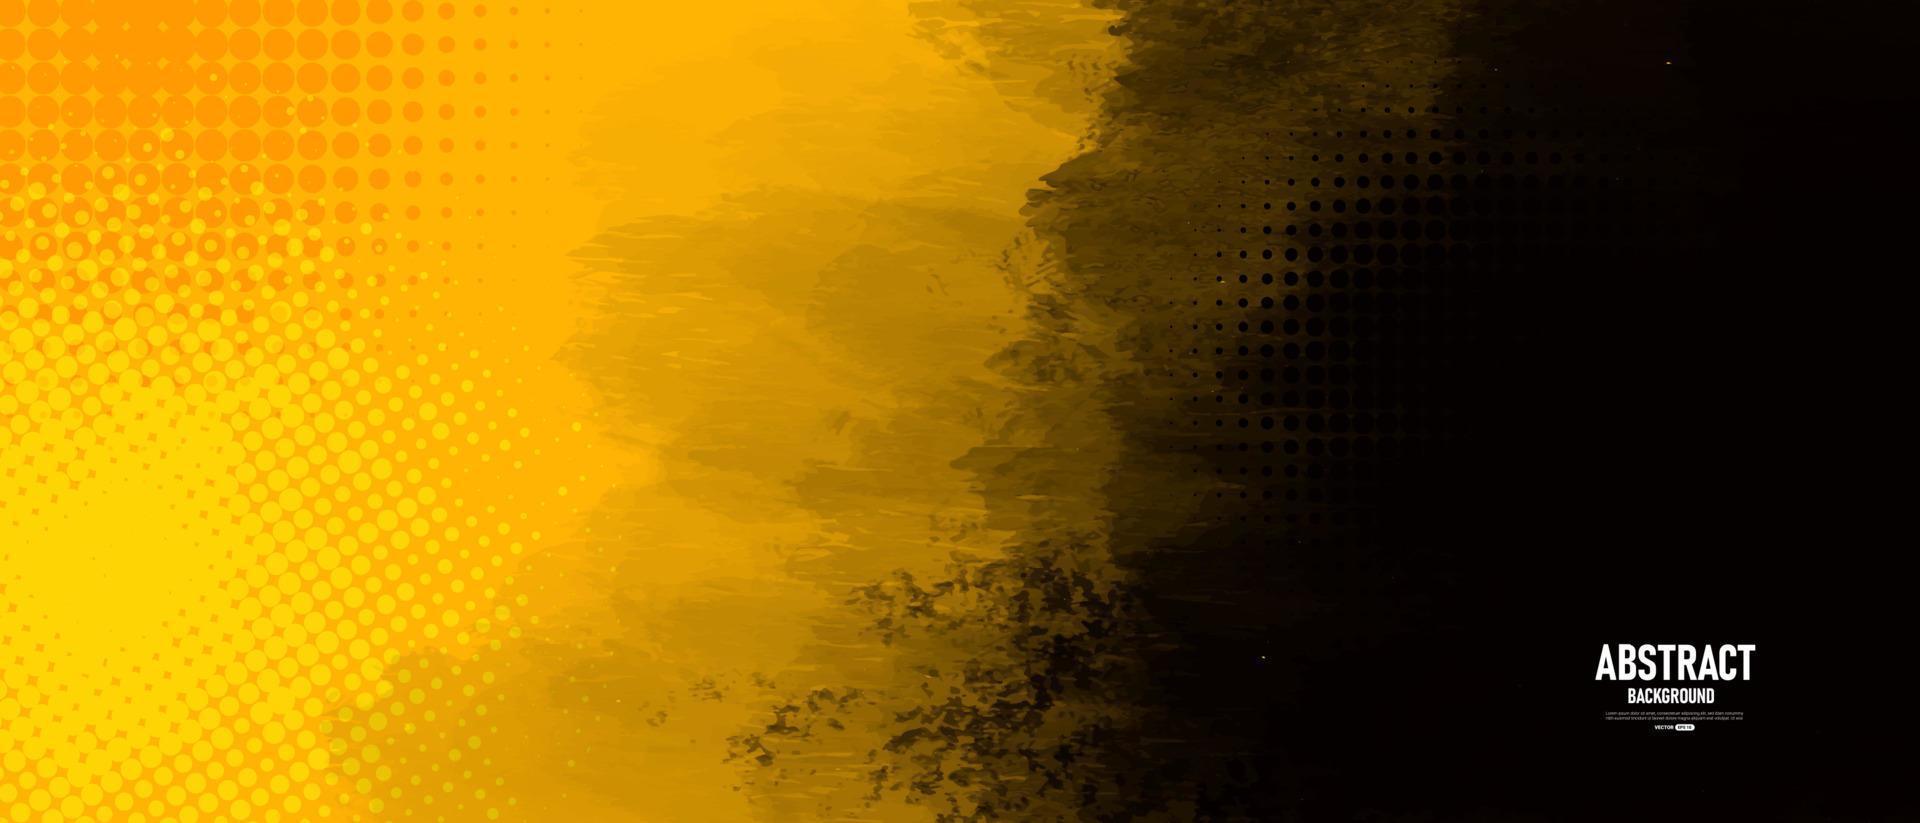 Black and Yellow abstract background with grunge texture. 3804974